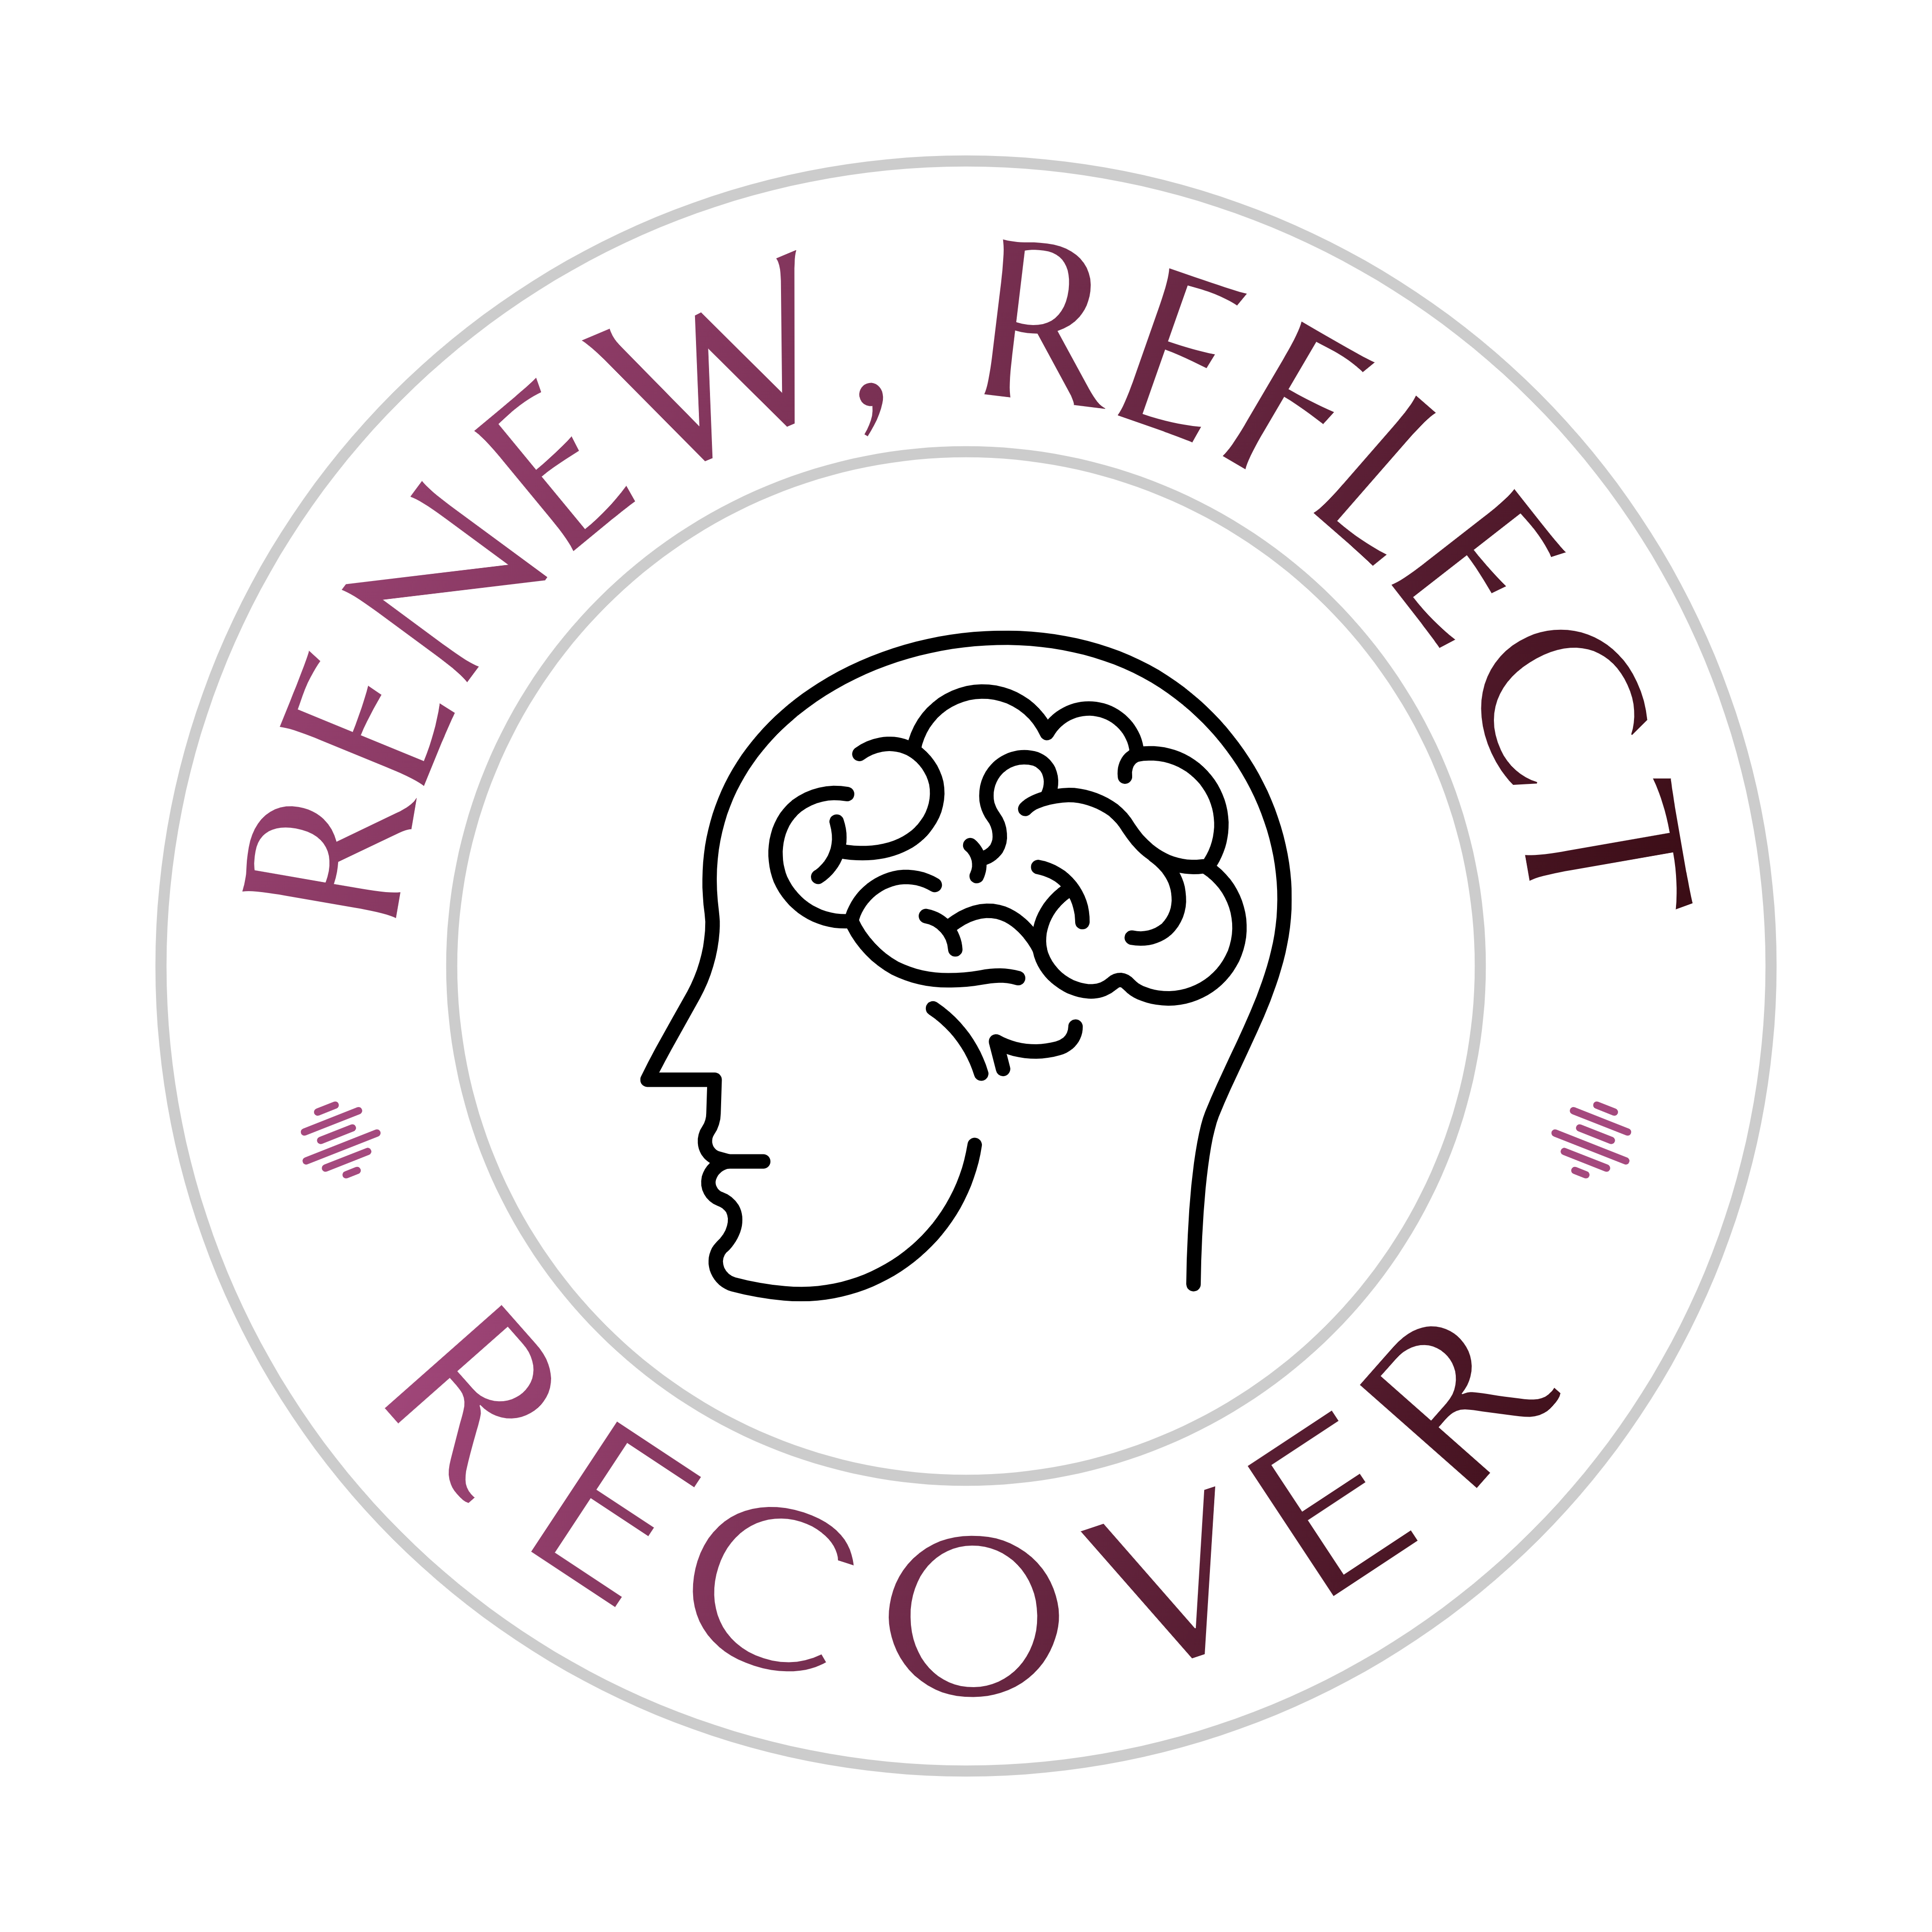 Renew, Reflect, Recover